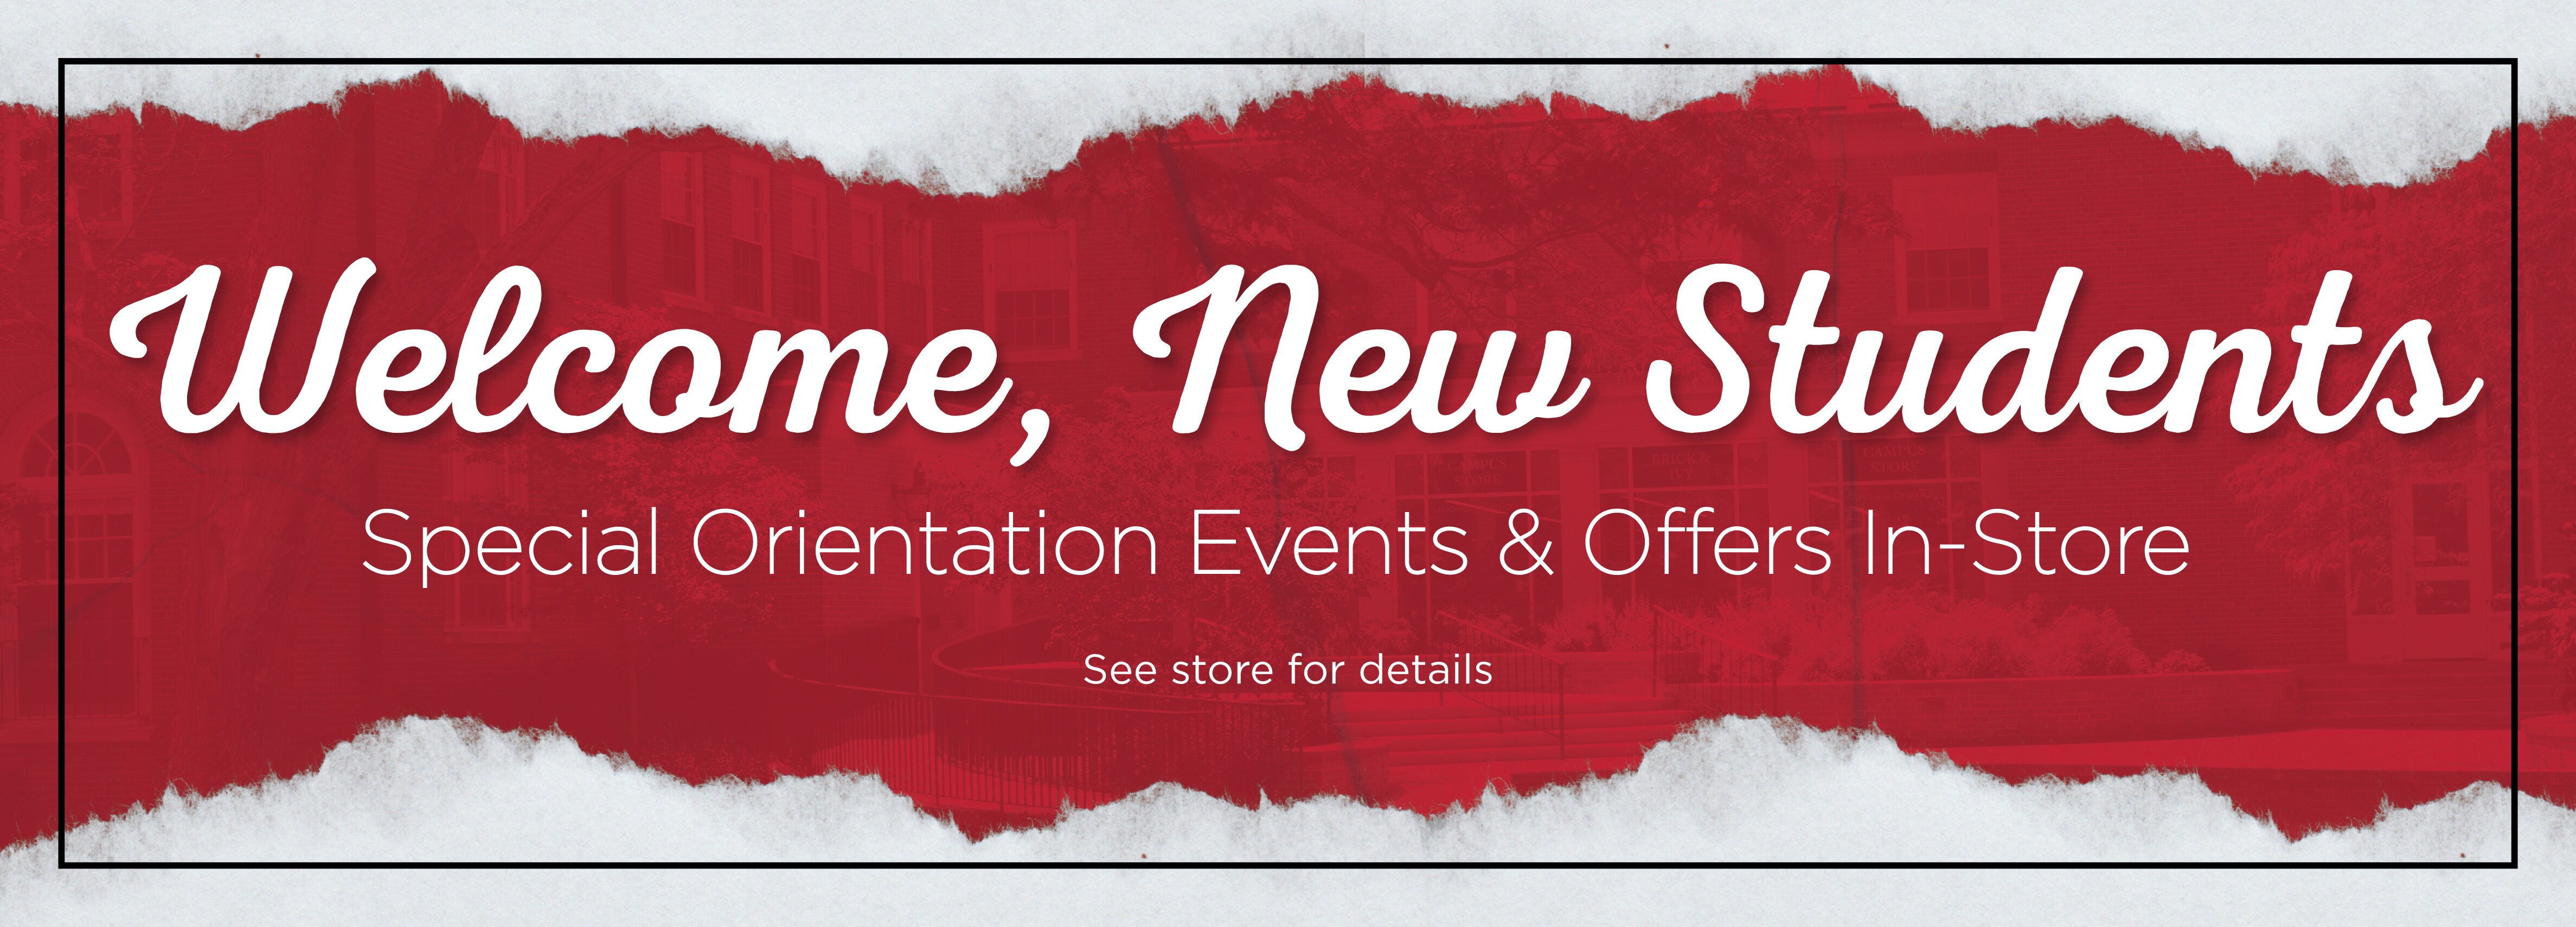 Welcome, New Students Special Orientation Events & Offers in-store